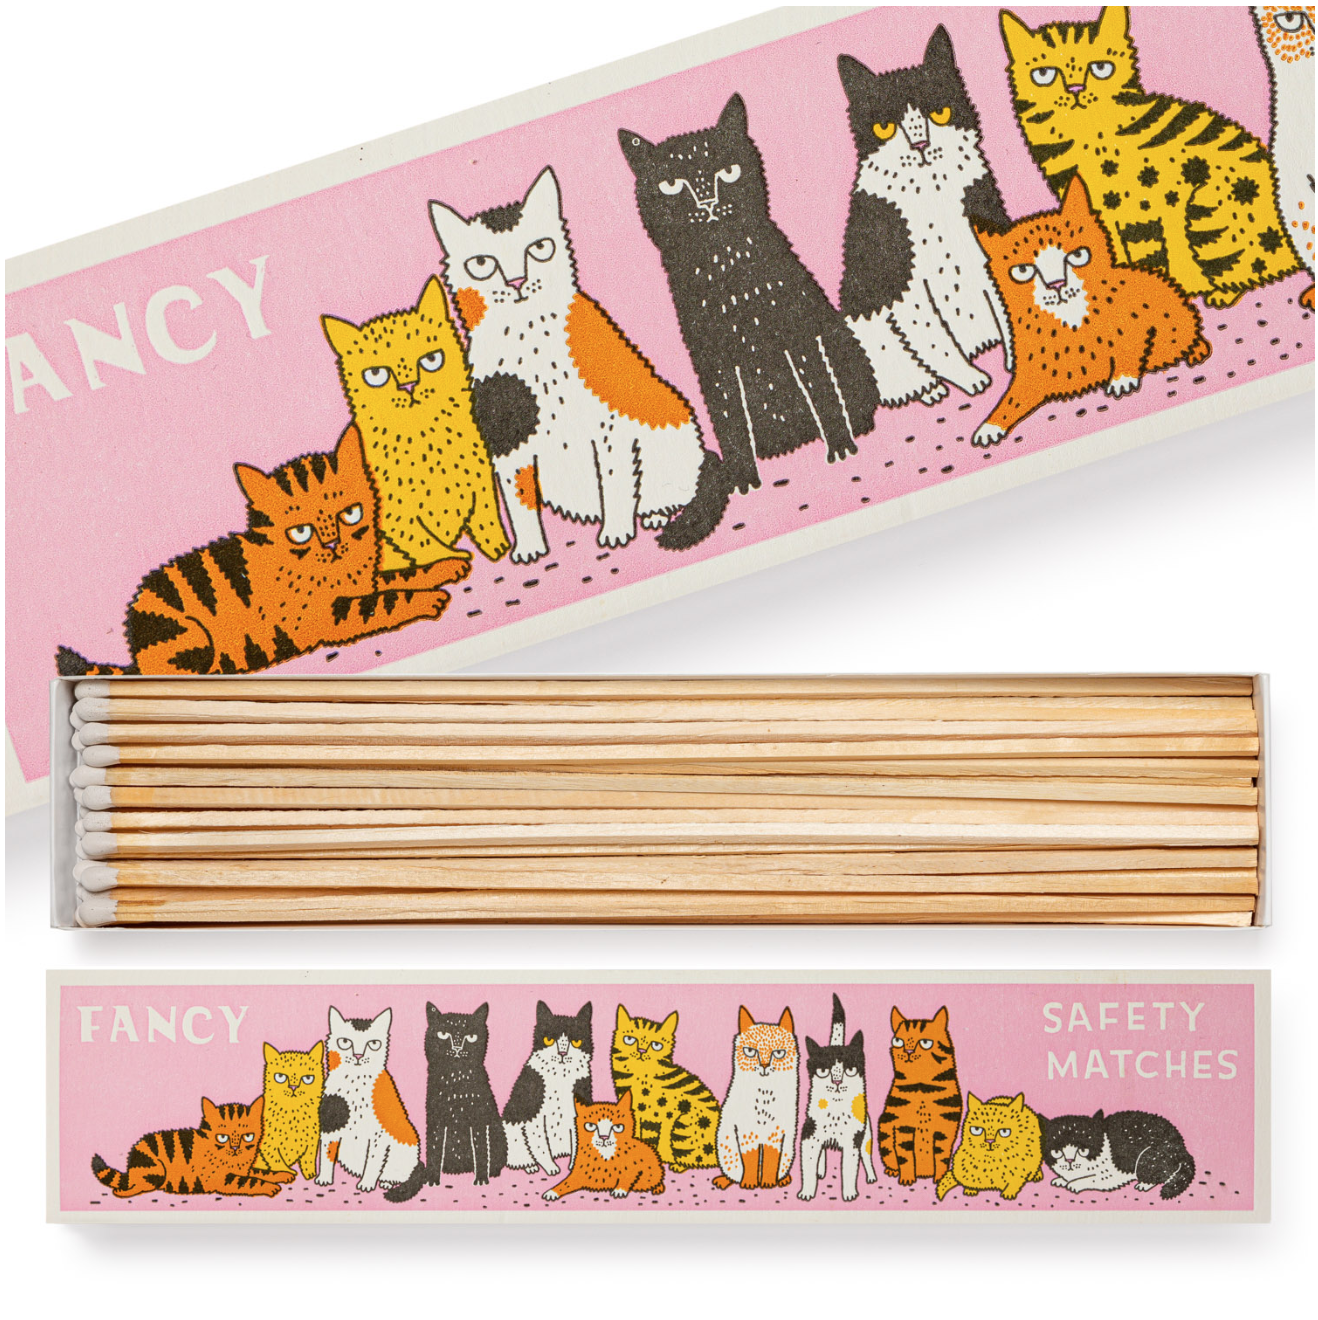 Fancy Cat Safety Matches